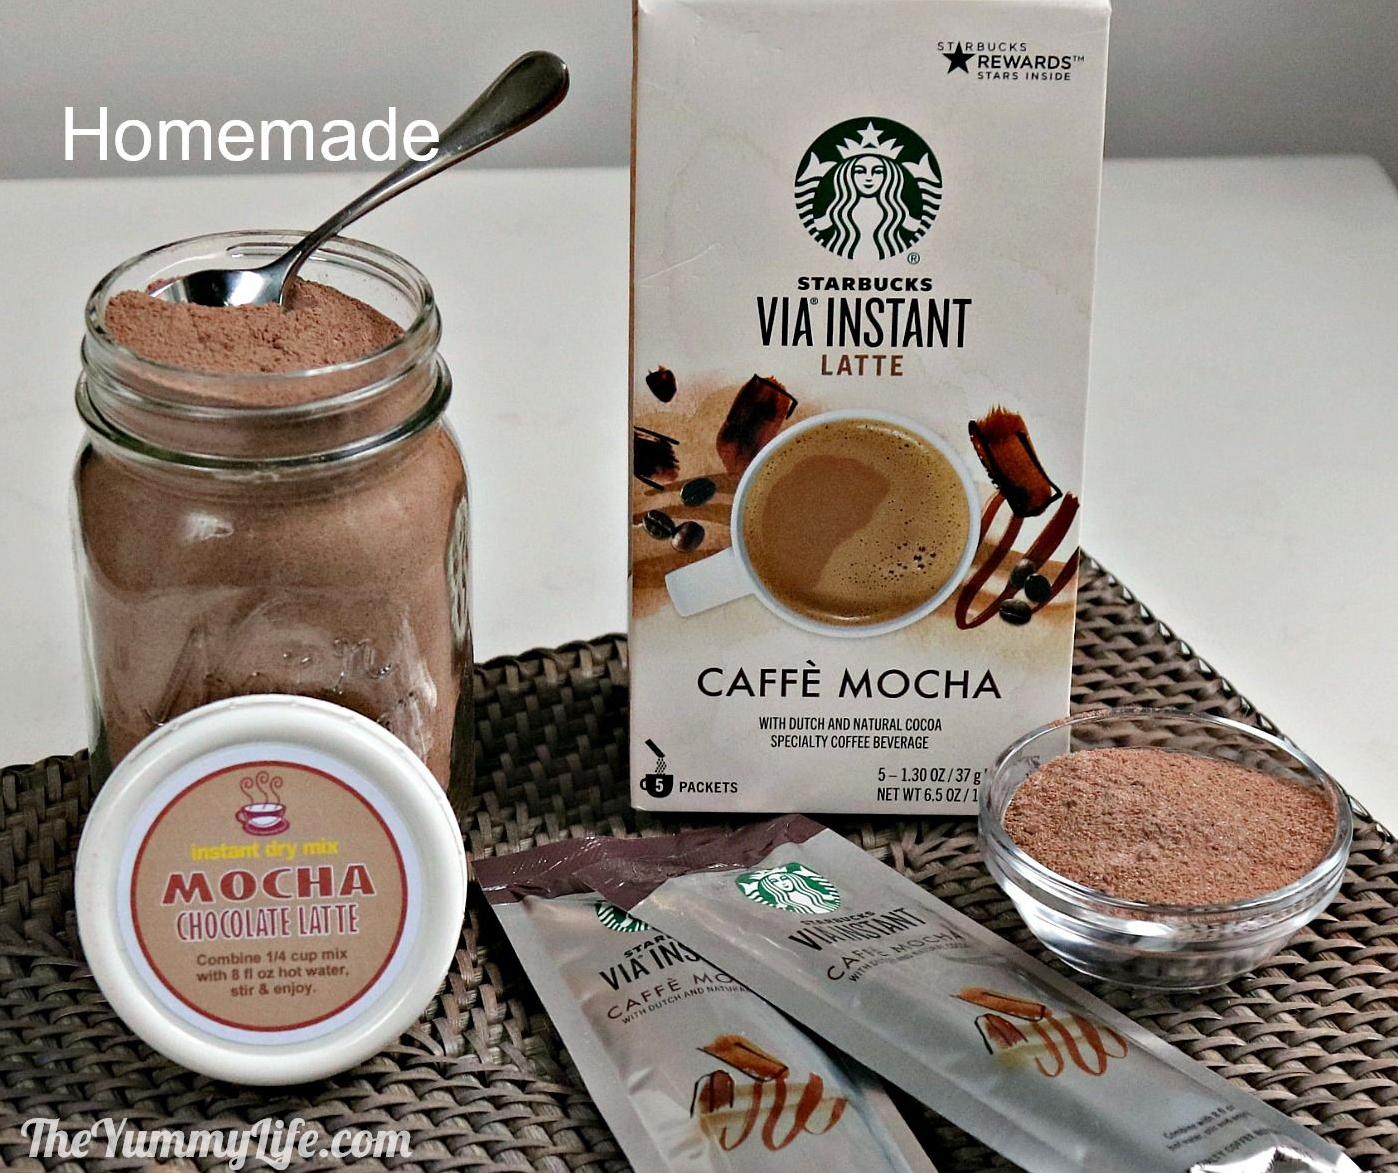  Start your day with a smile and a cup of our Café Mocha Drink Mix